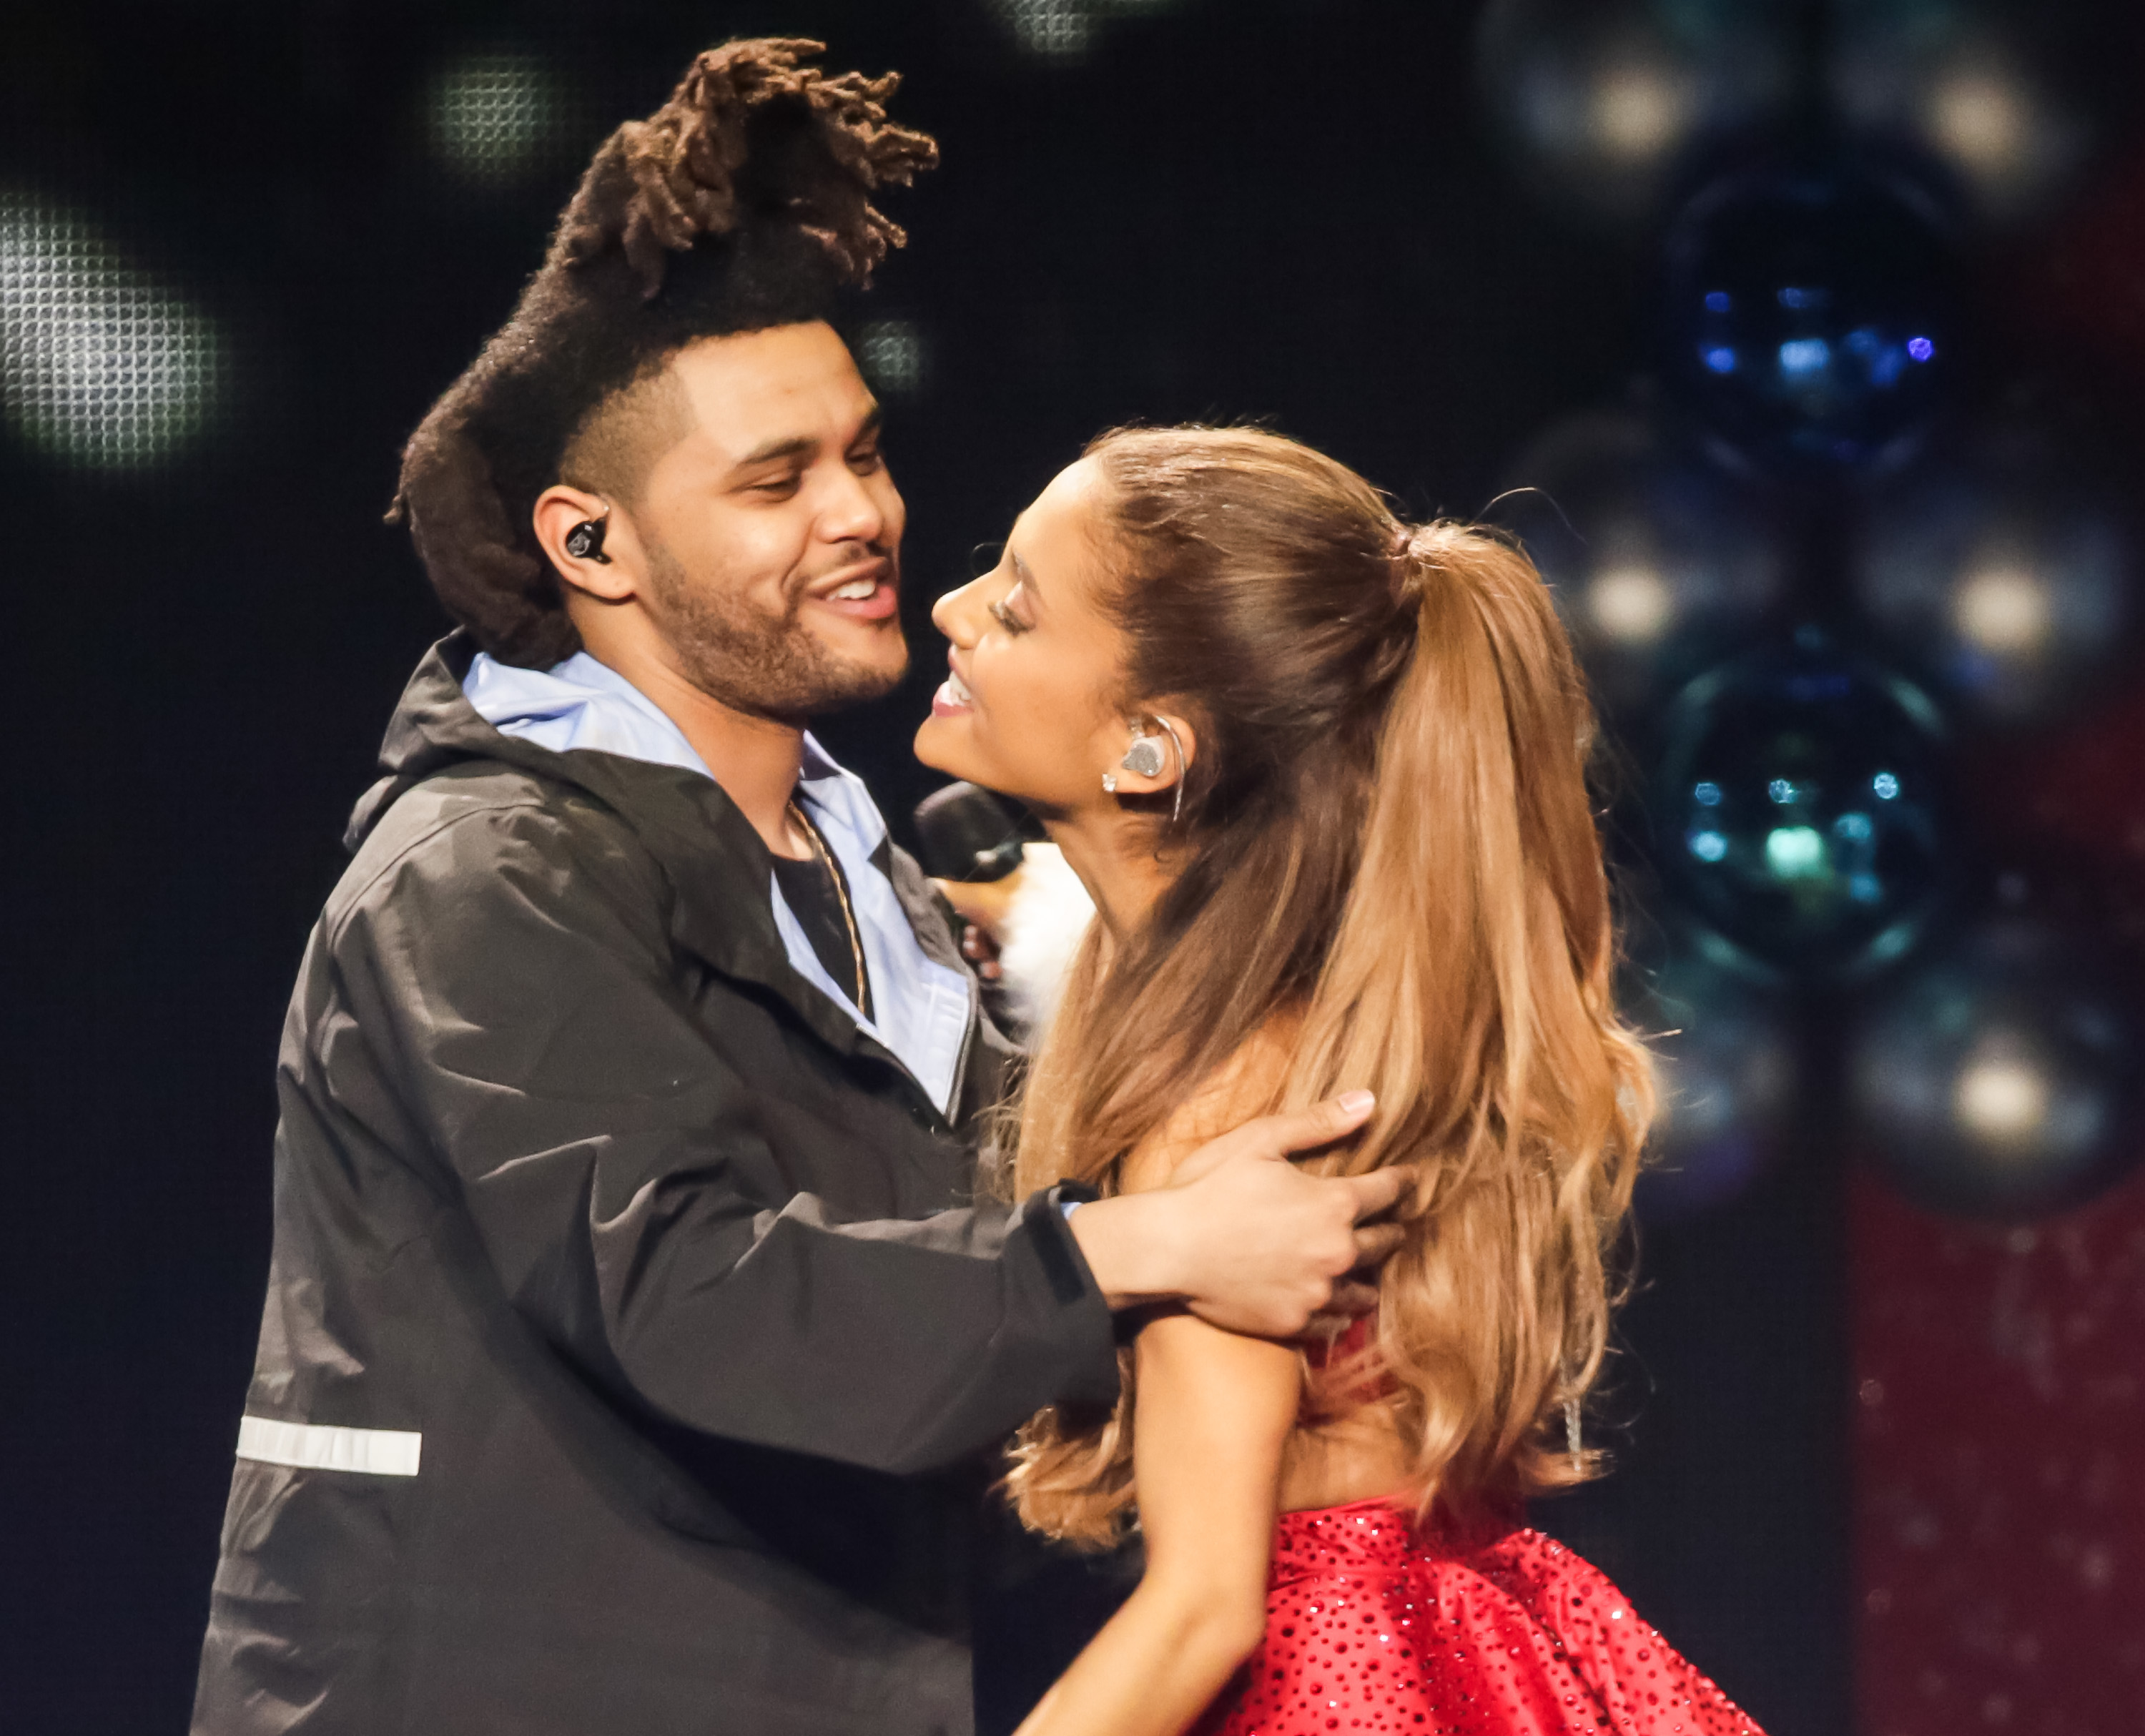 The Weeknd and Ariana Grande on stage